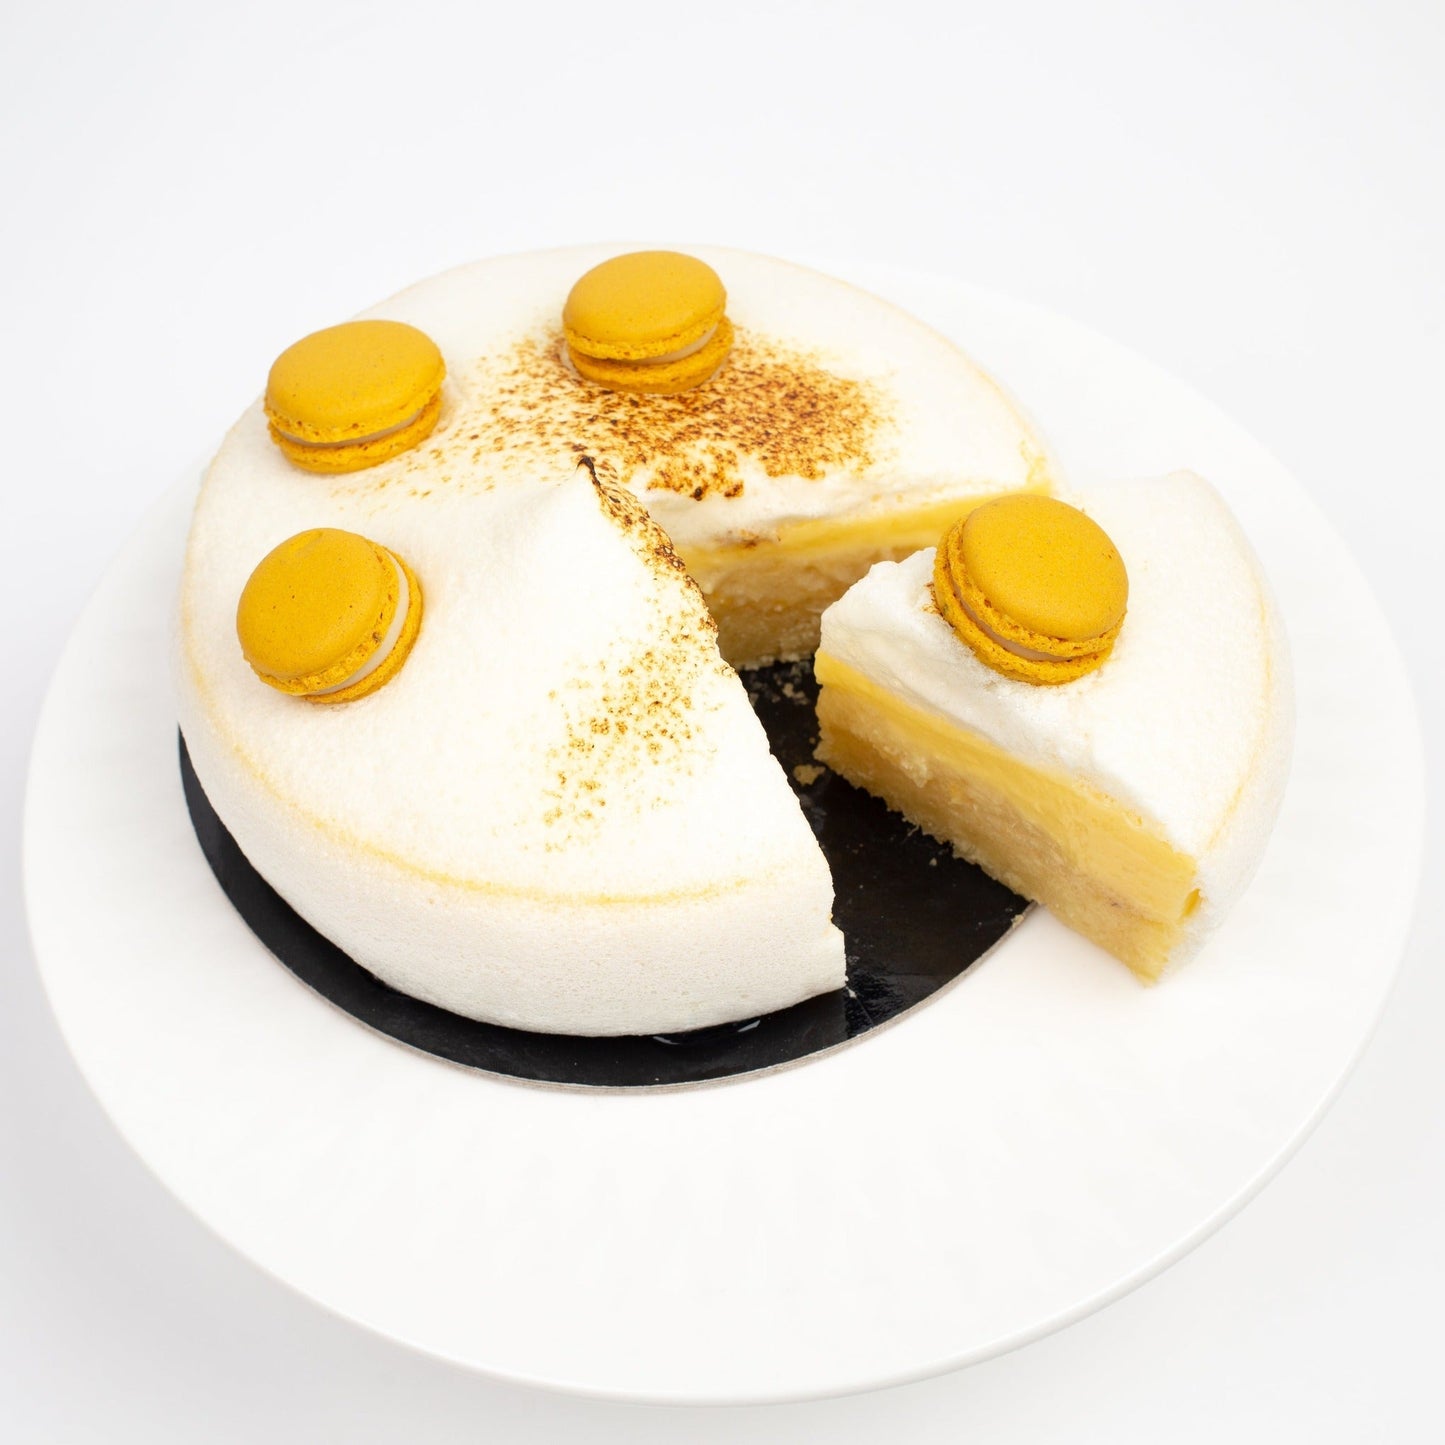 Gluten free lemon tart - Yann Haute Patisserie, authentic French bakery for the best desserts, cakes, croissants and macarons in this happy yellow house pastry shop. 